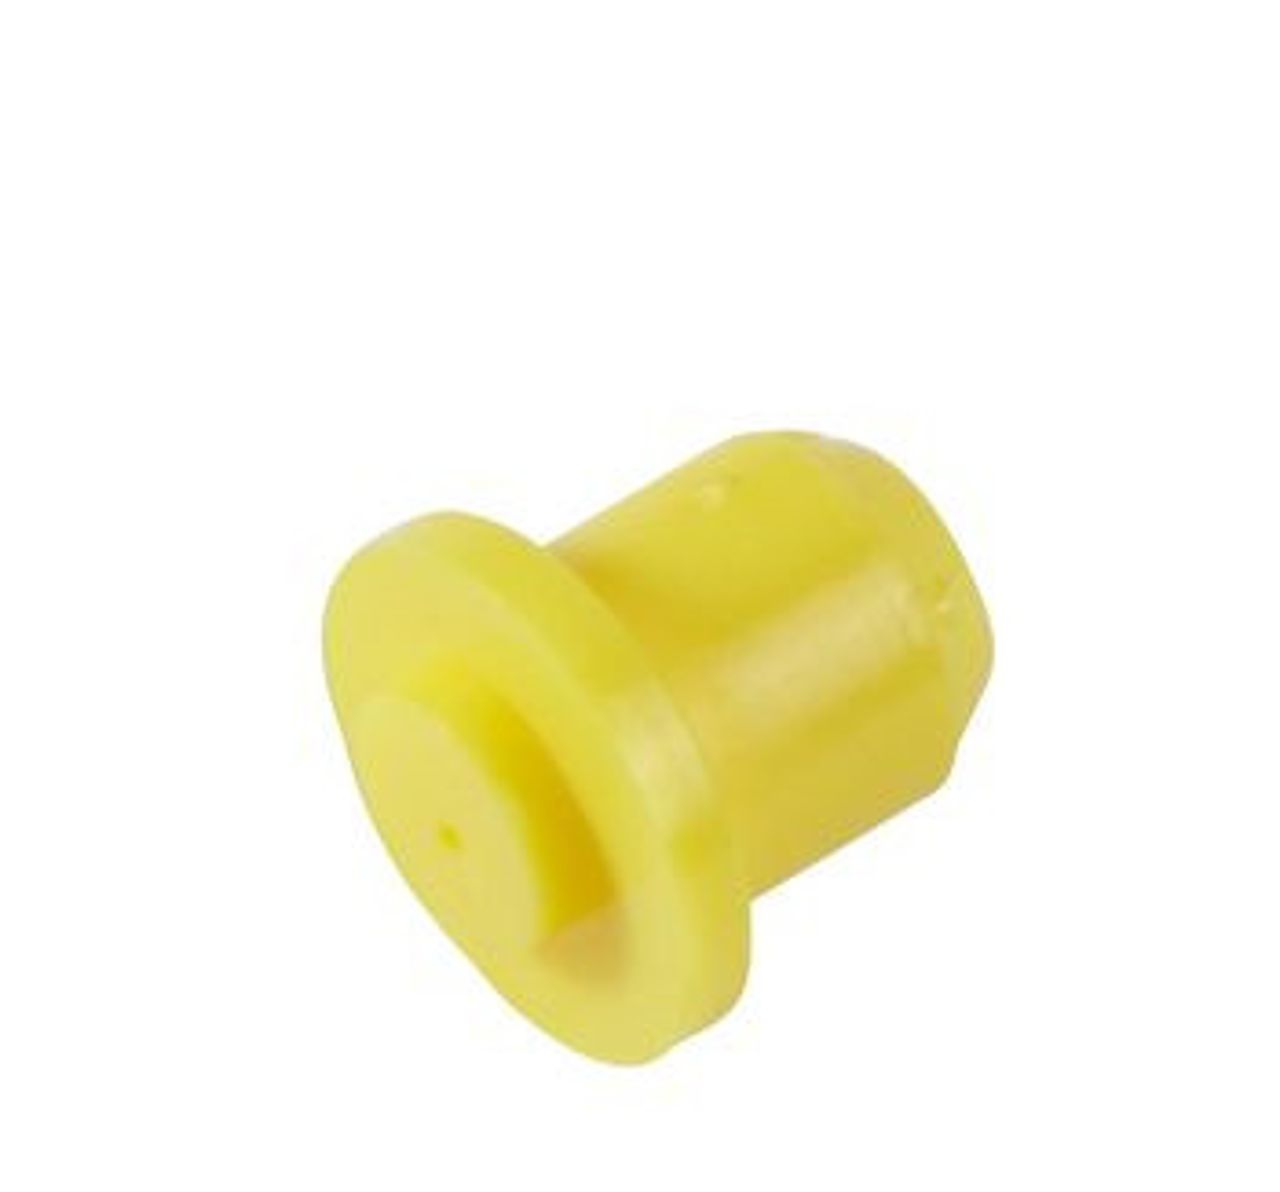 Aprilaire Yellow Replacement Orifice For Humidifier Models 400/500/550/558/560/568/600 2172234